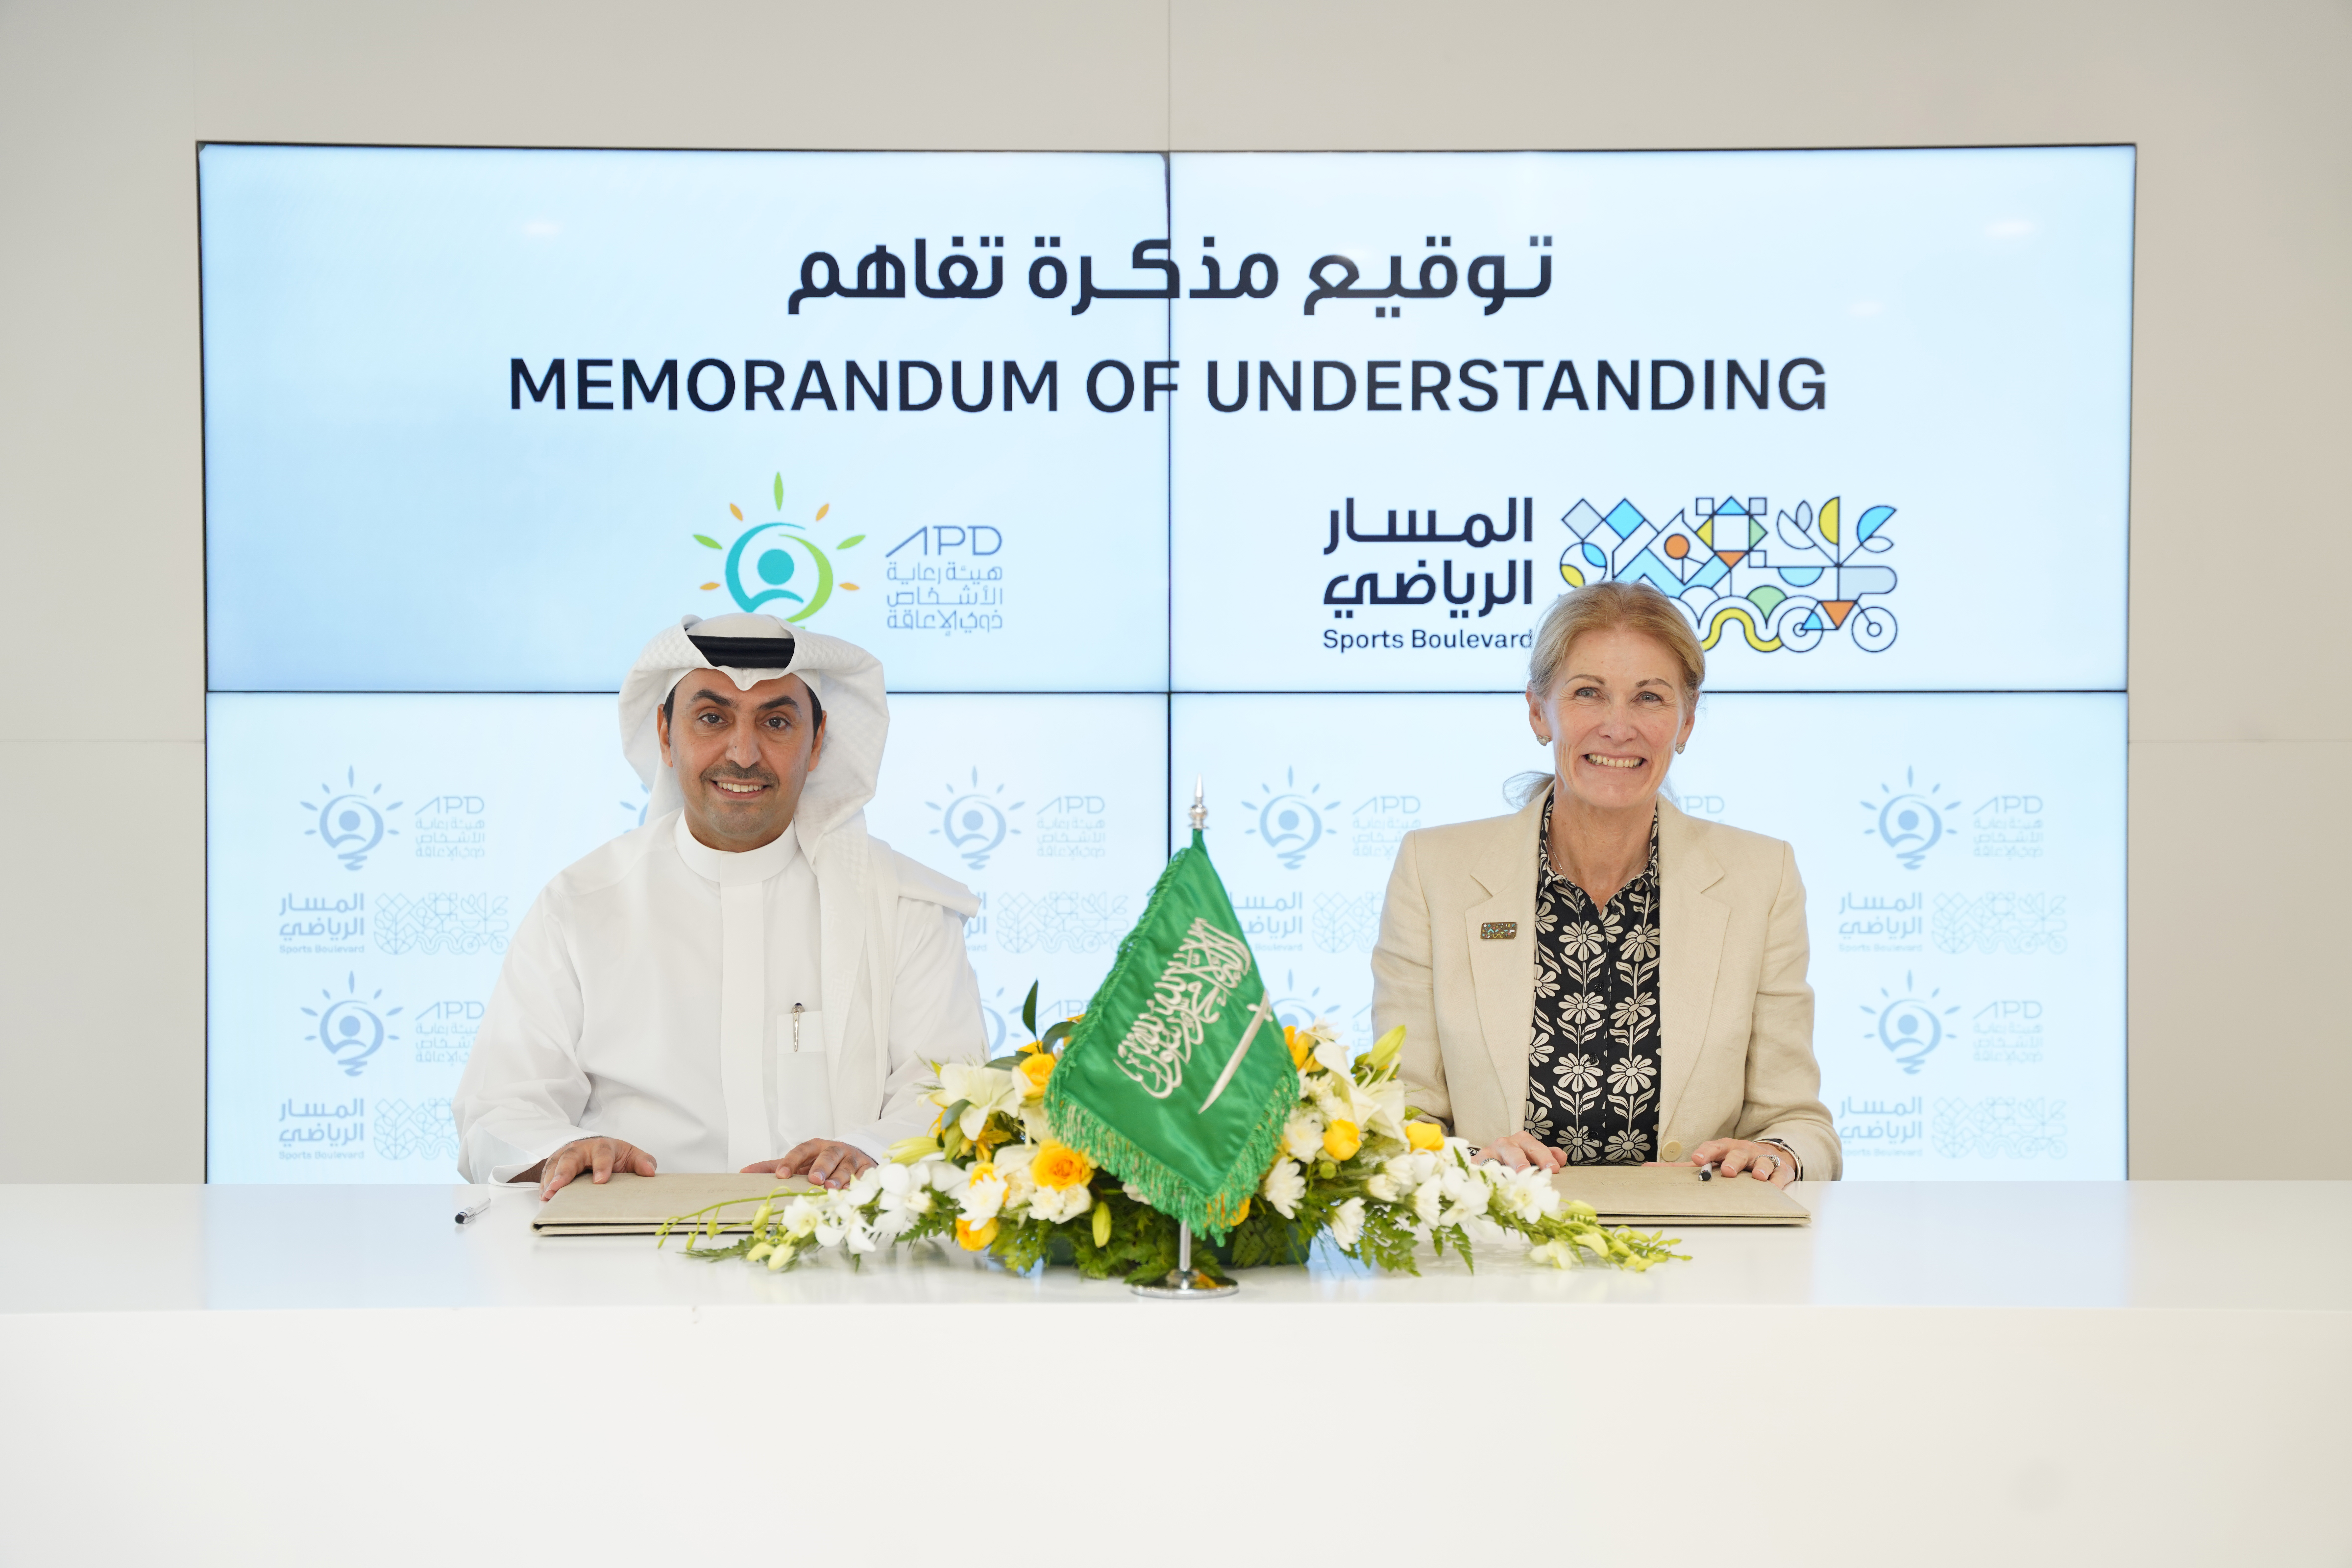 The Sports Boulevard Foundation (SBF) and the Authority for the Care of People with Disabilities (APD) have today signed a Memorandum of Underst